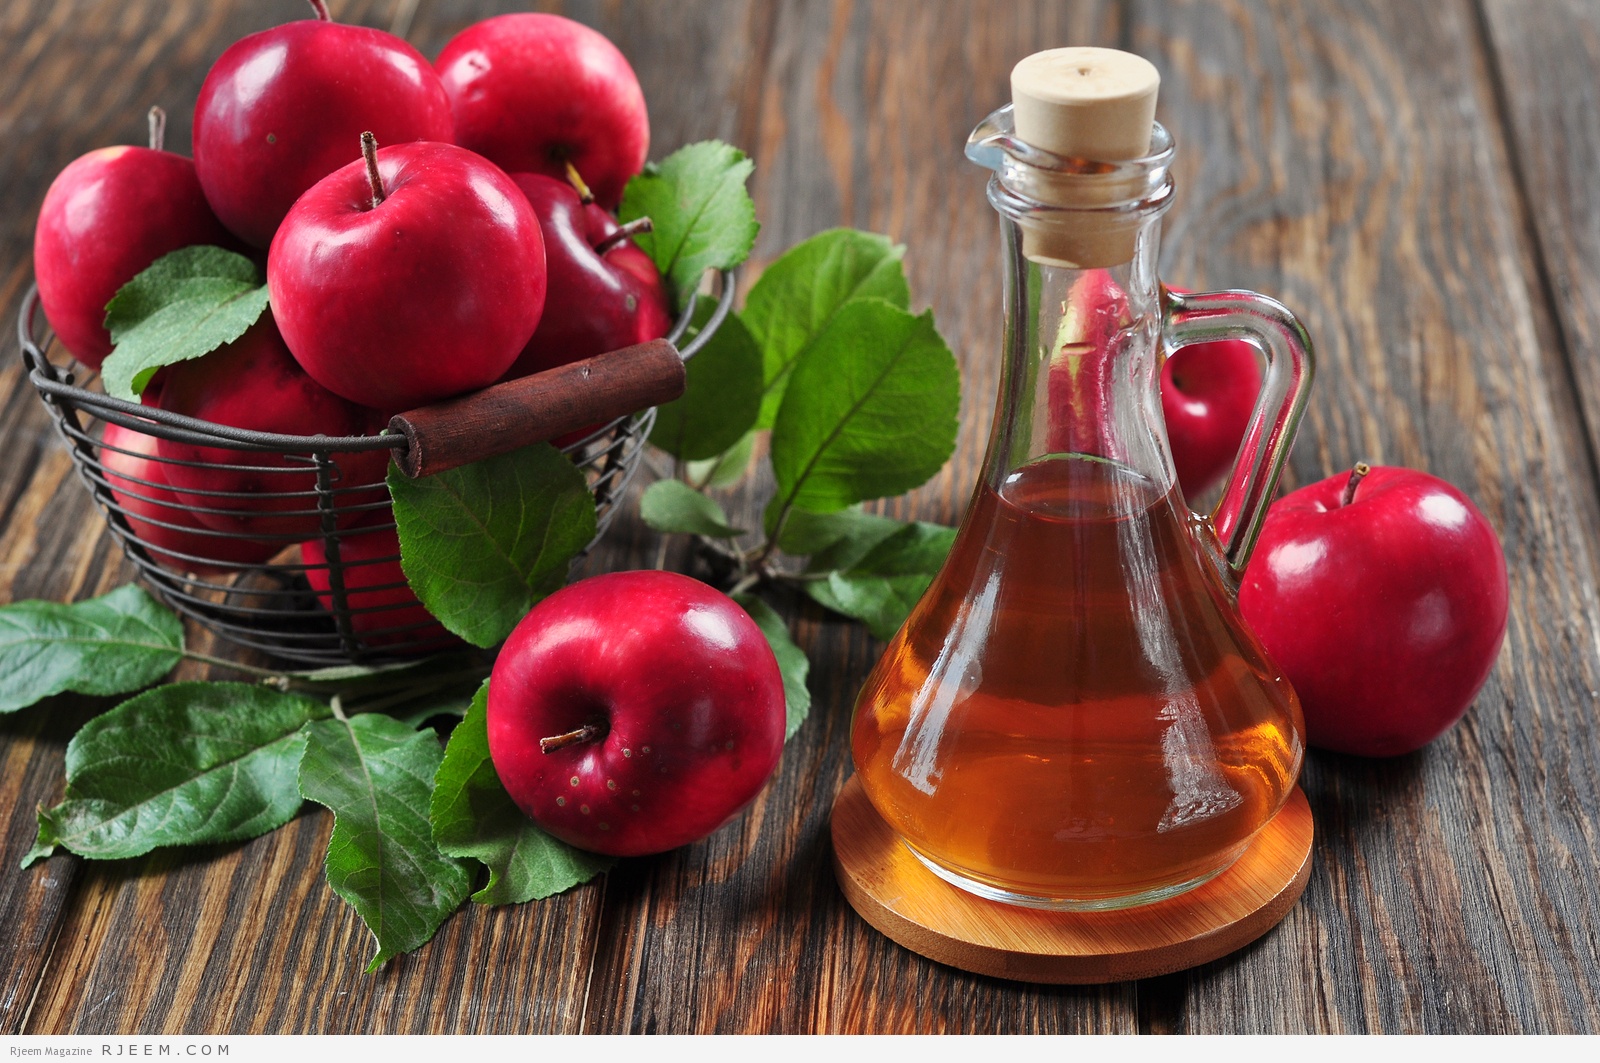 Apple cider vinegar in glass bottle and basket with fresh apples ** Note: Shallow depth of field